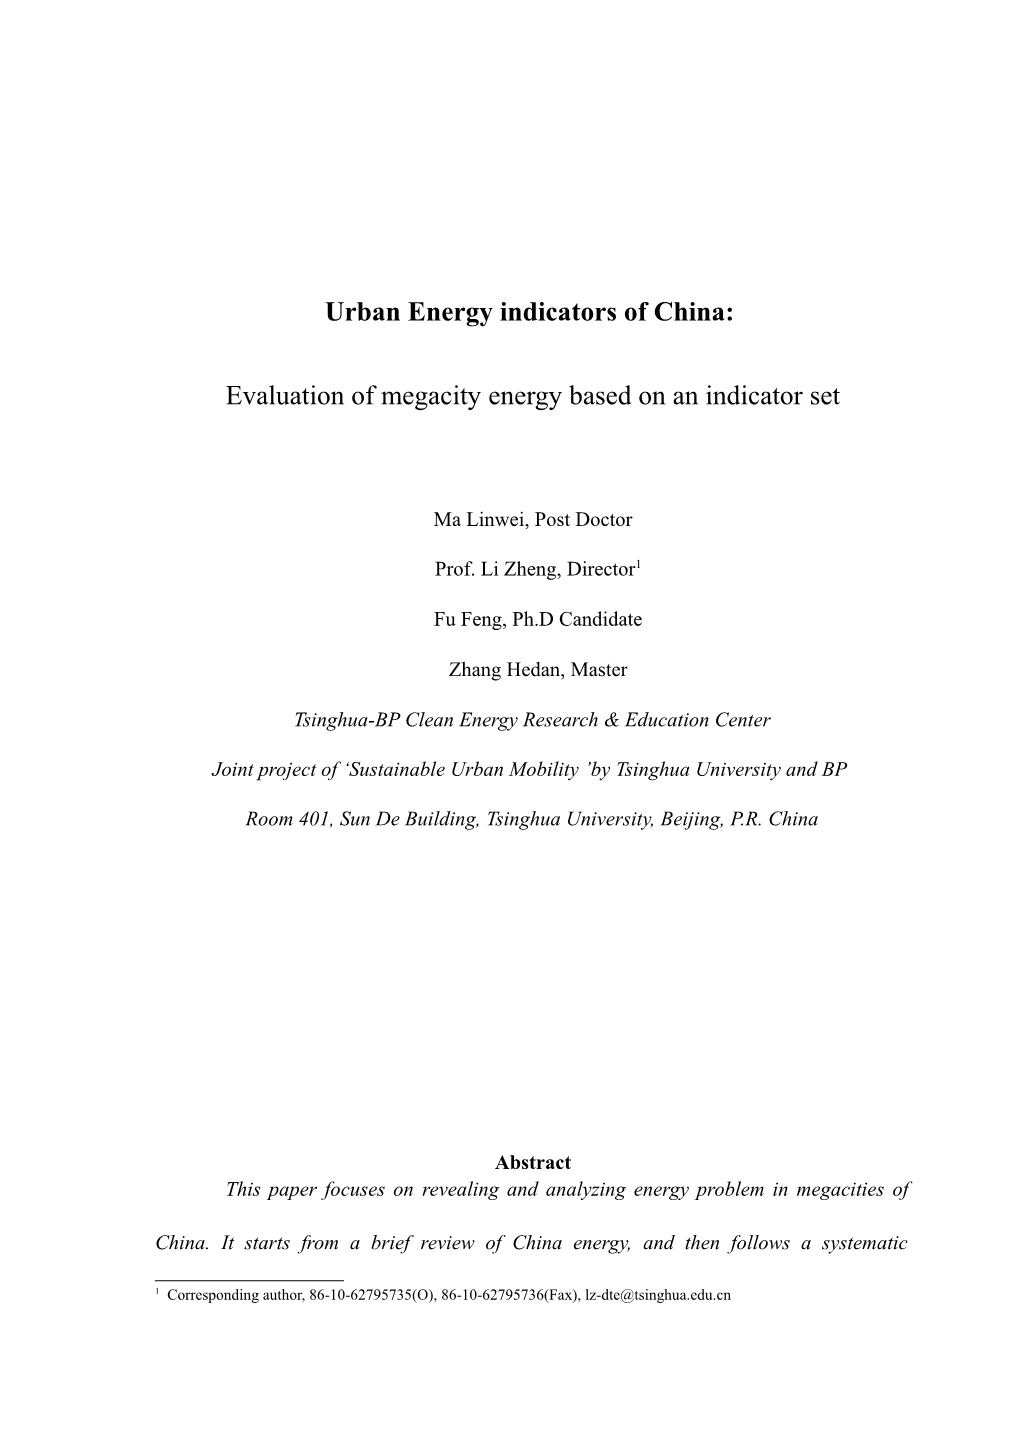 Energy for Megacities of China